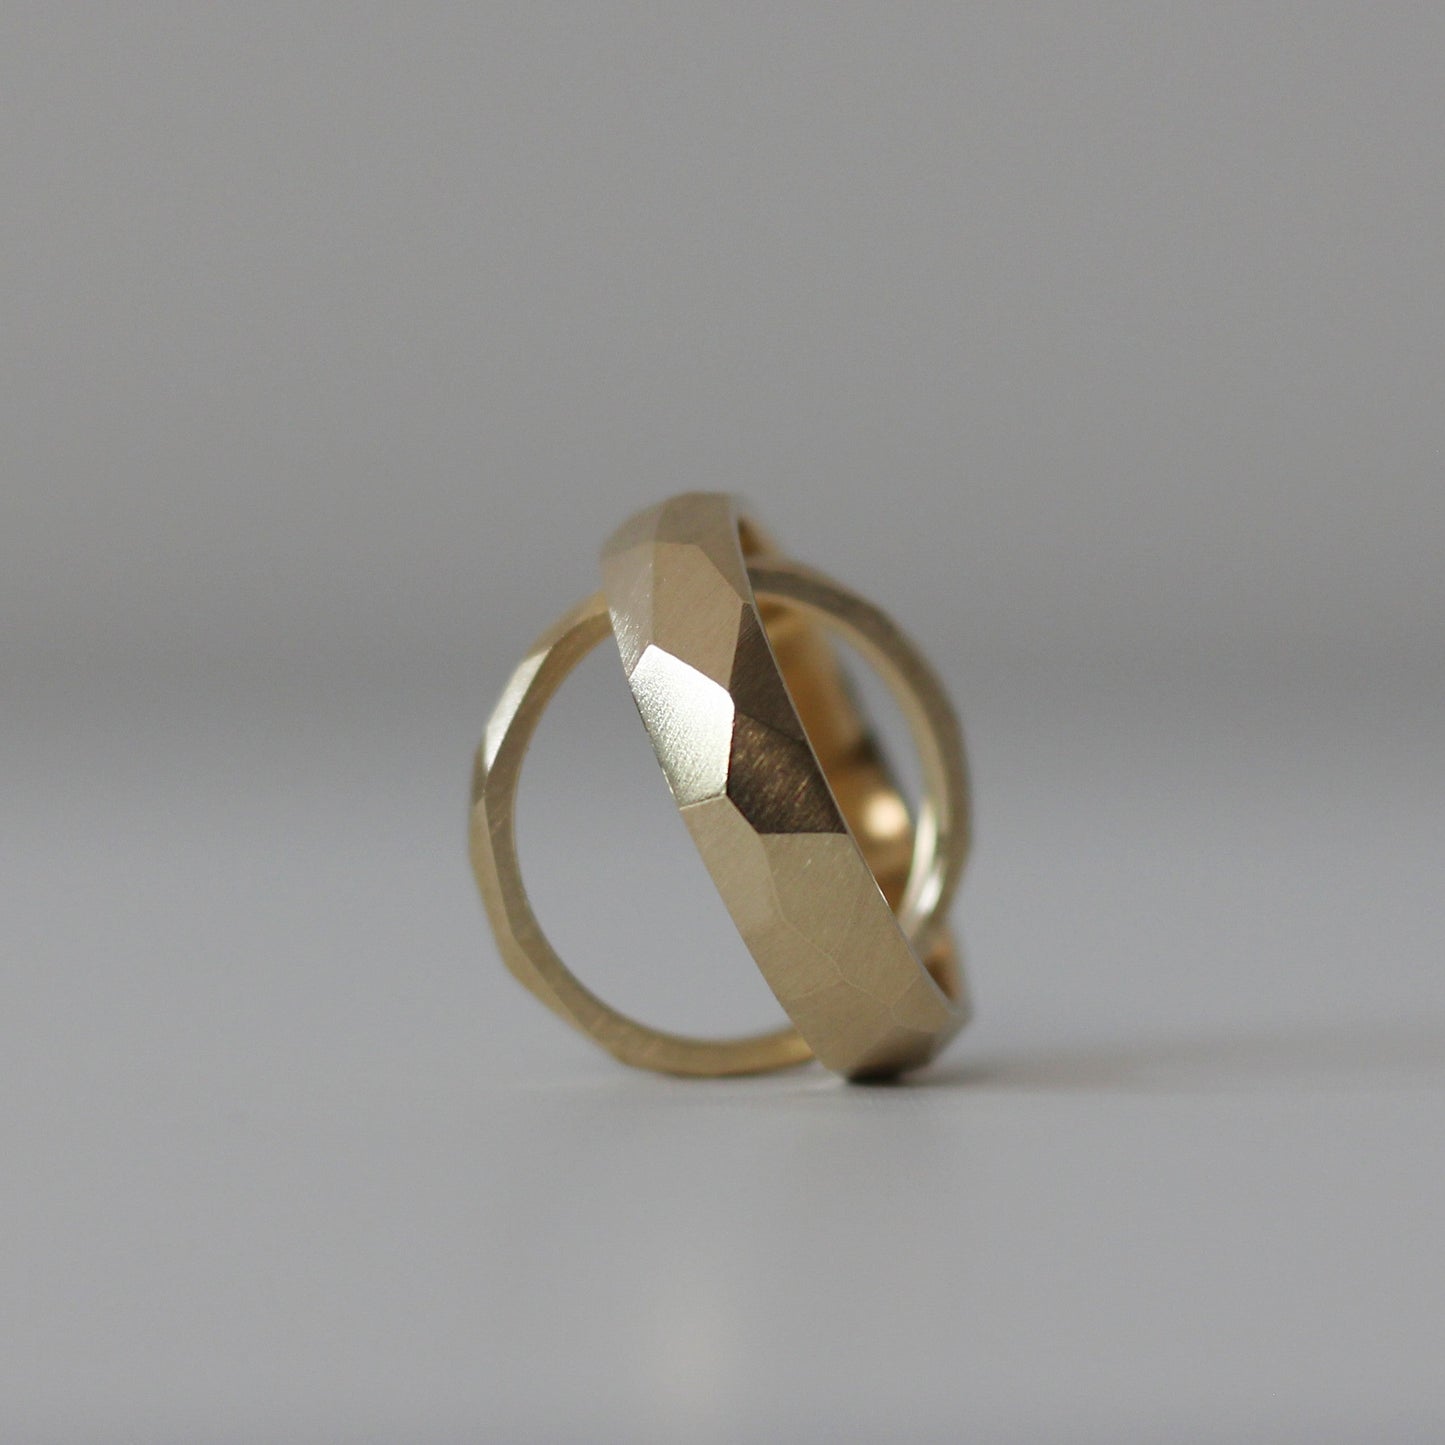 Geometric Faceted Ring - 9ct/18ct Gold, 2mm and 5mm width - Aisling Chou Studio